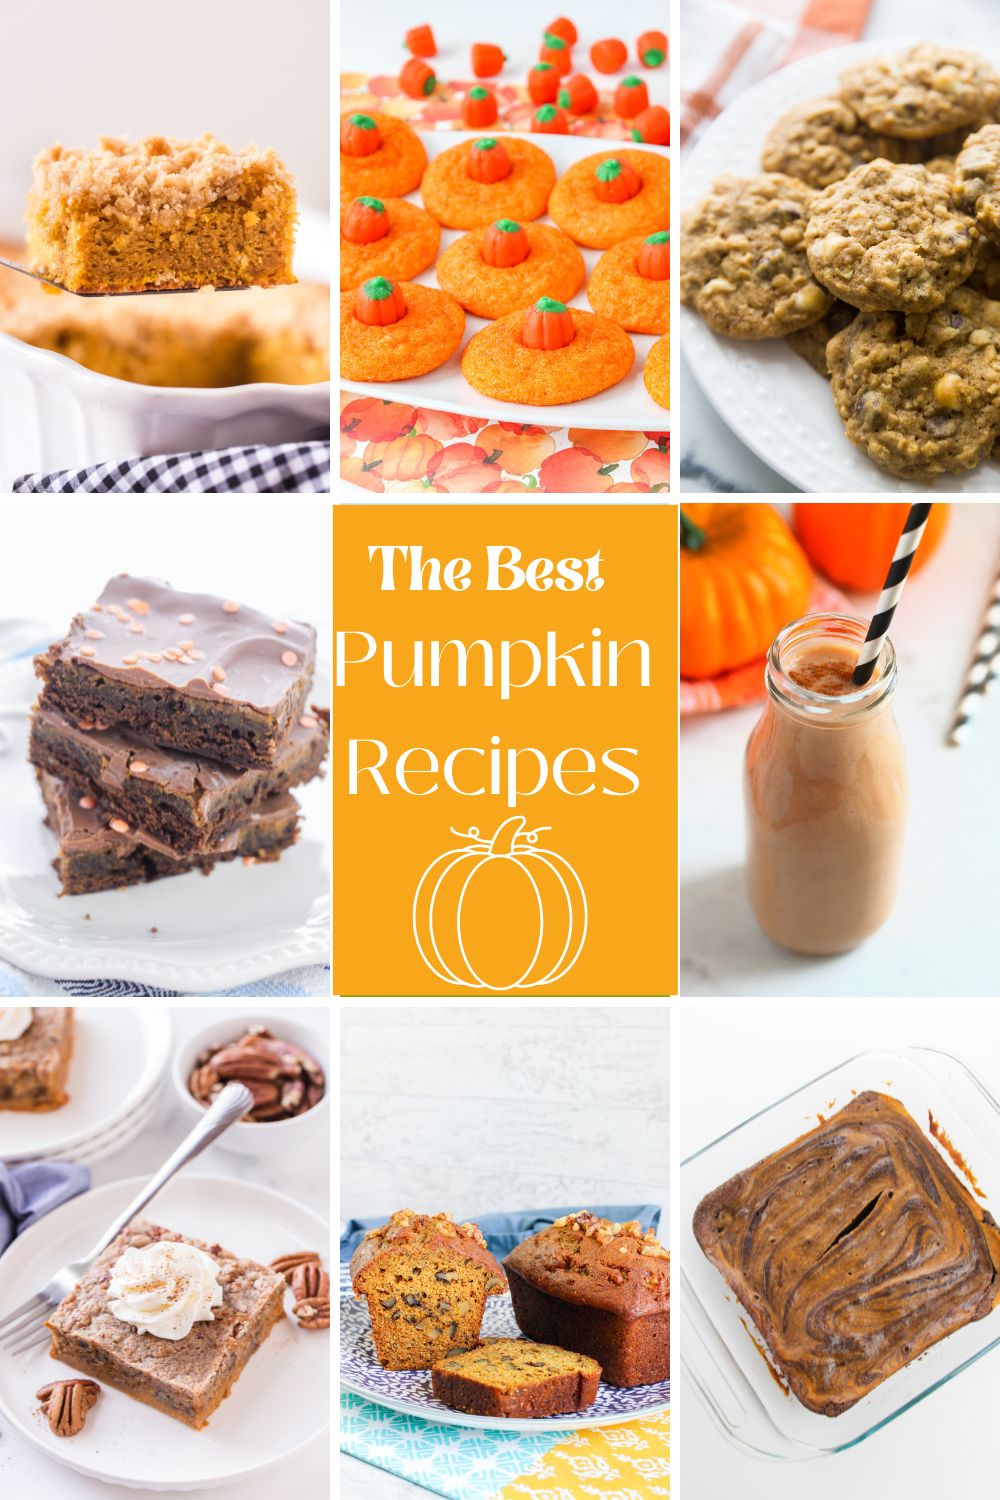 The Best Pumpkin Themed Recipes collage photo of 8 recipes images